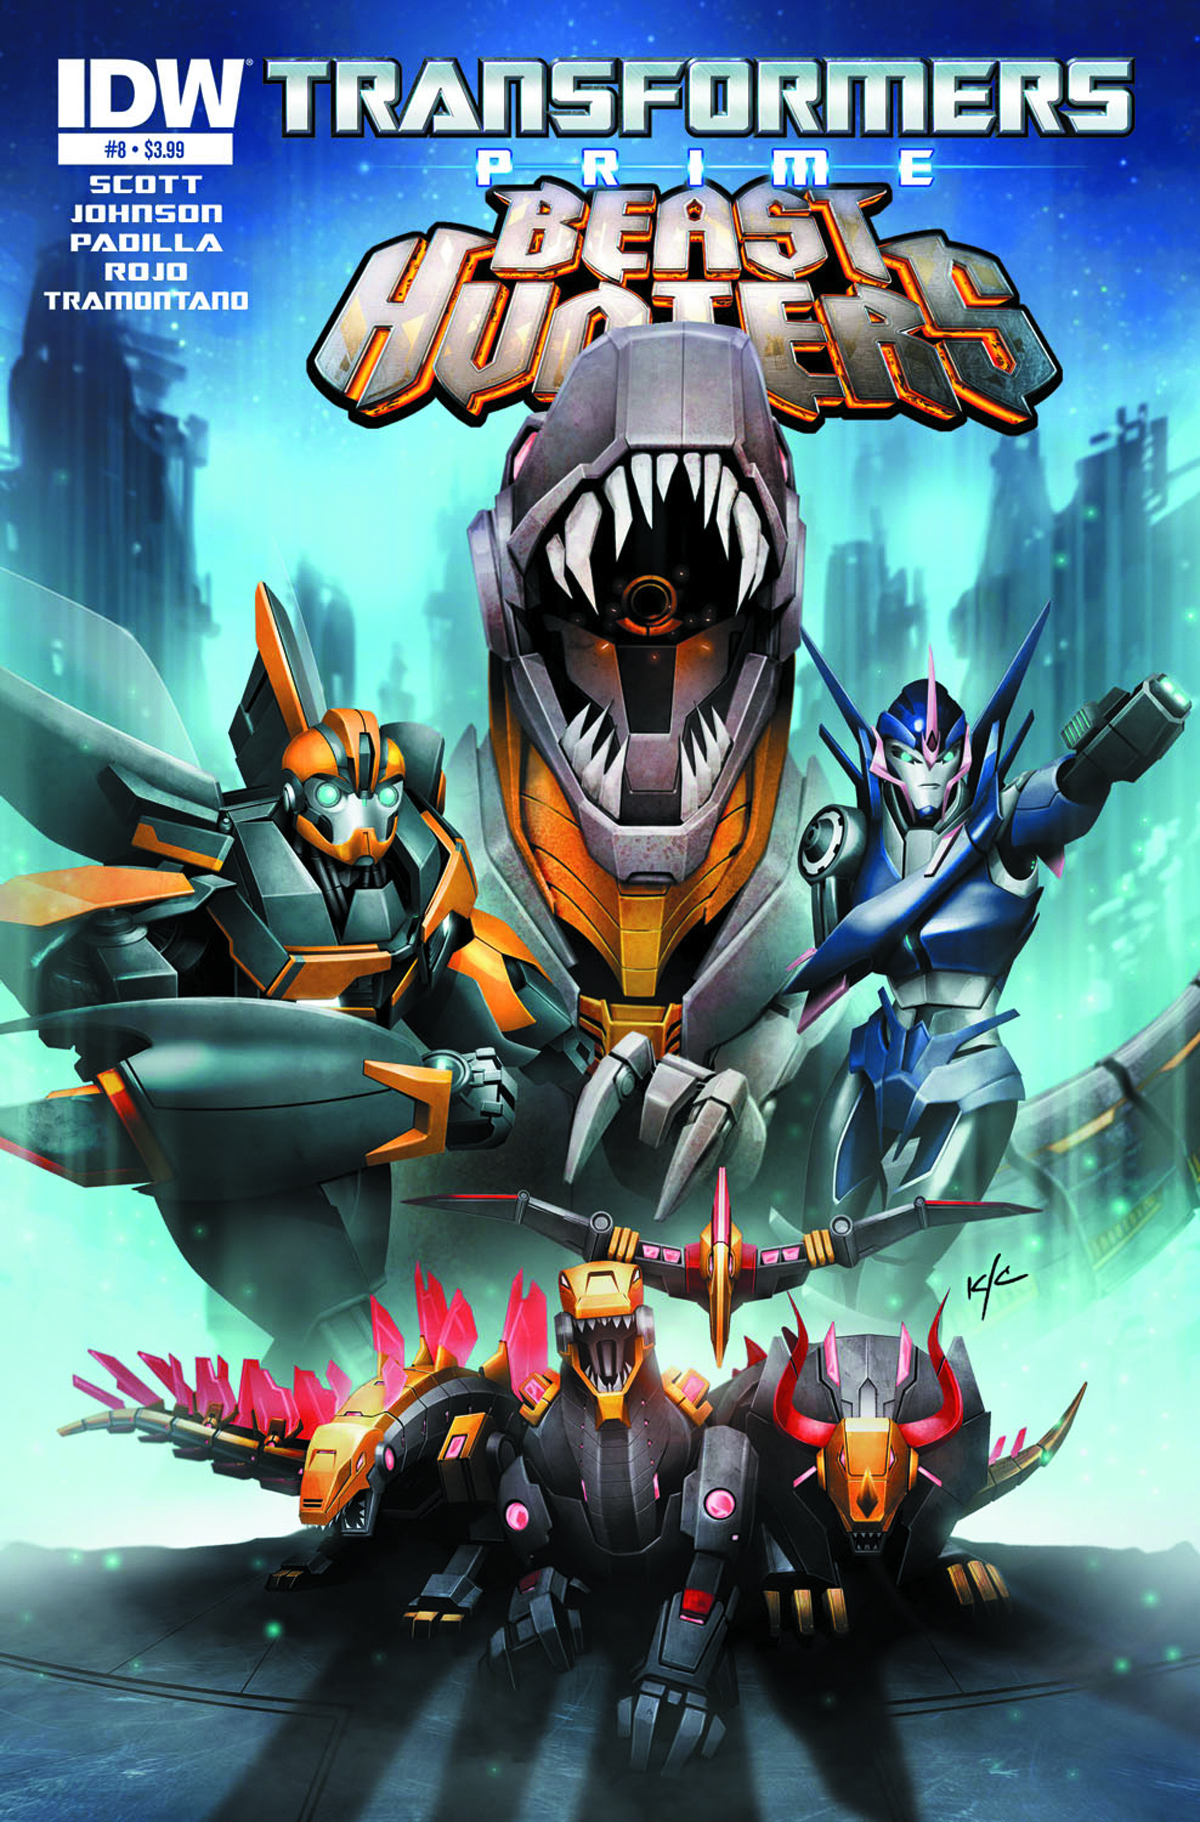 OCT130390 - TRANSFORMERS PRIME BEAST HUNTERS #8 - Previews World